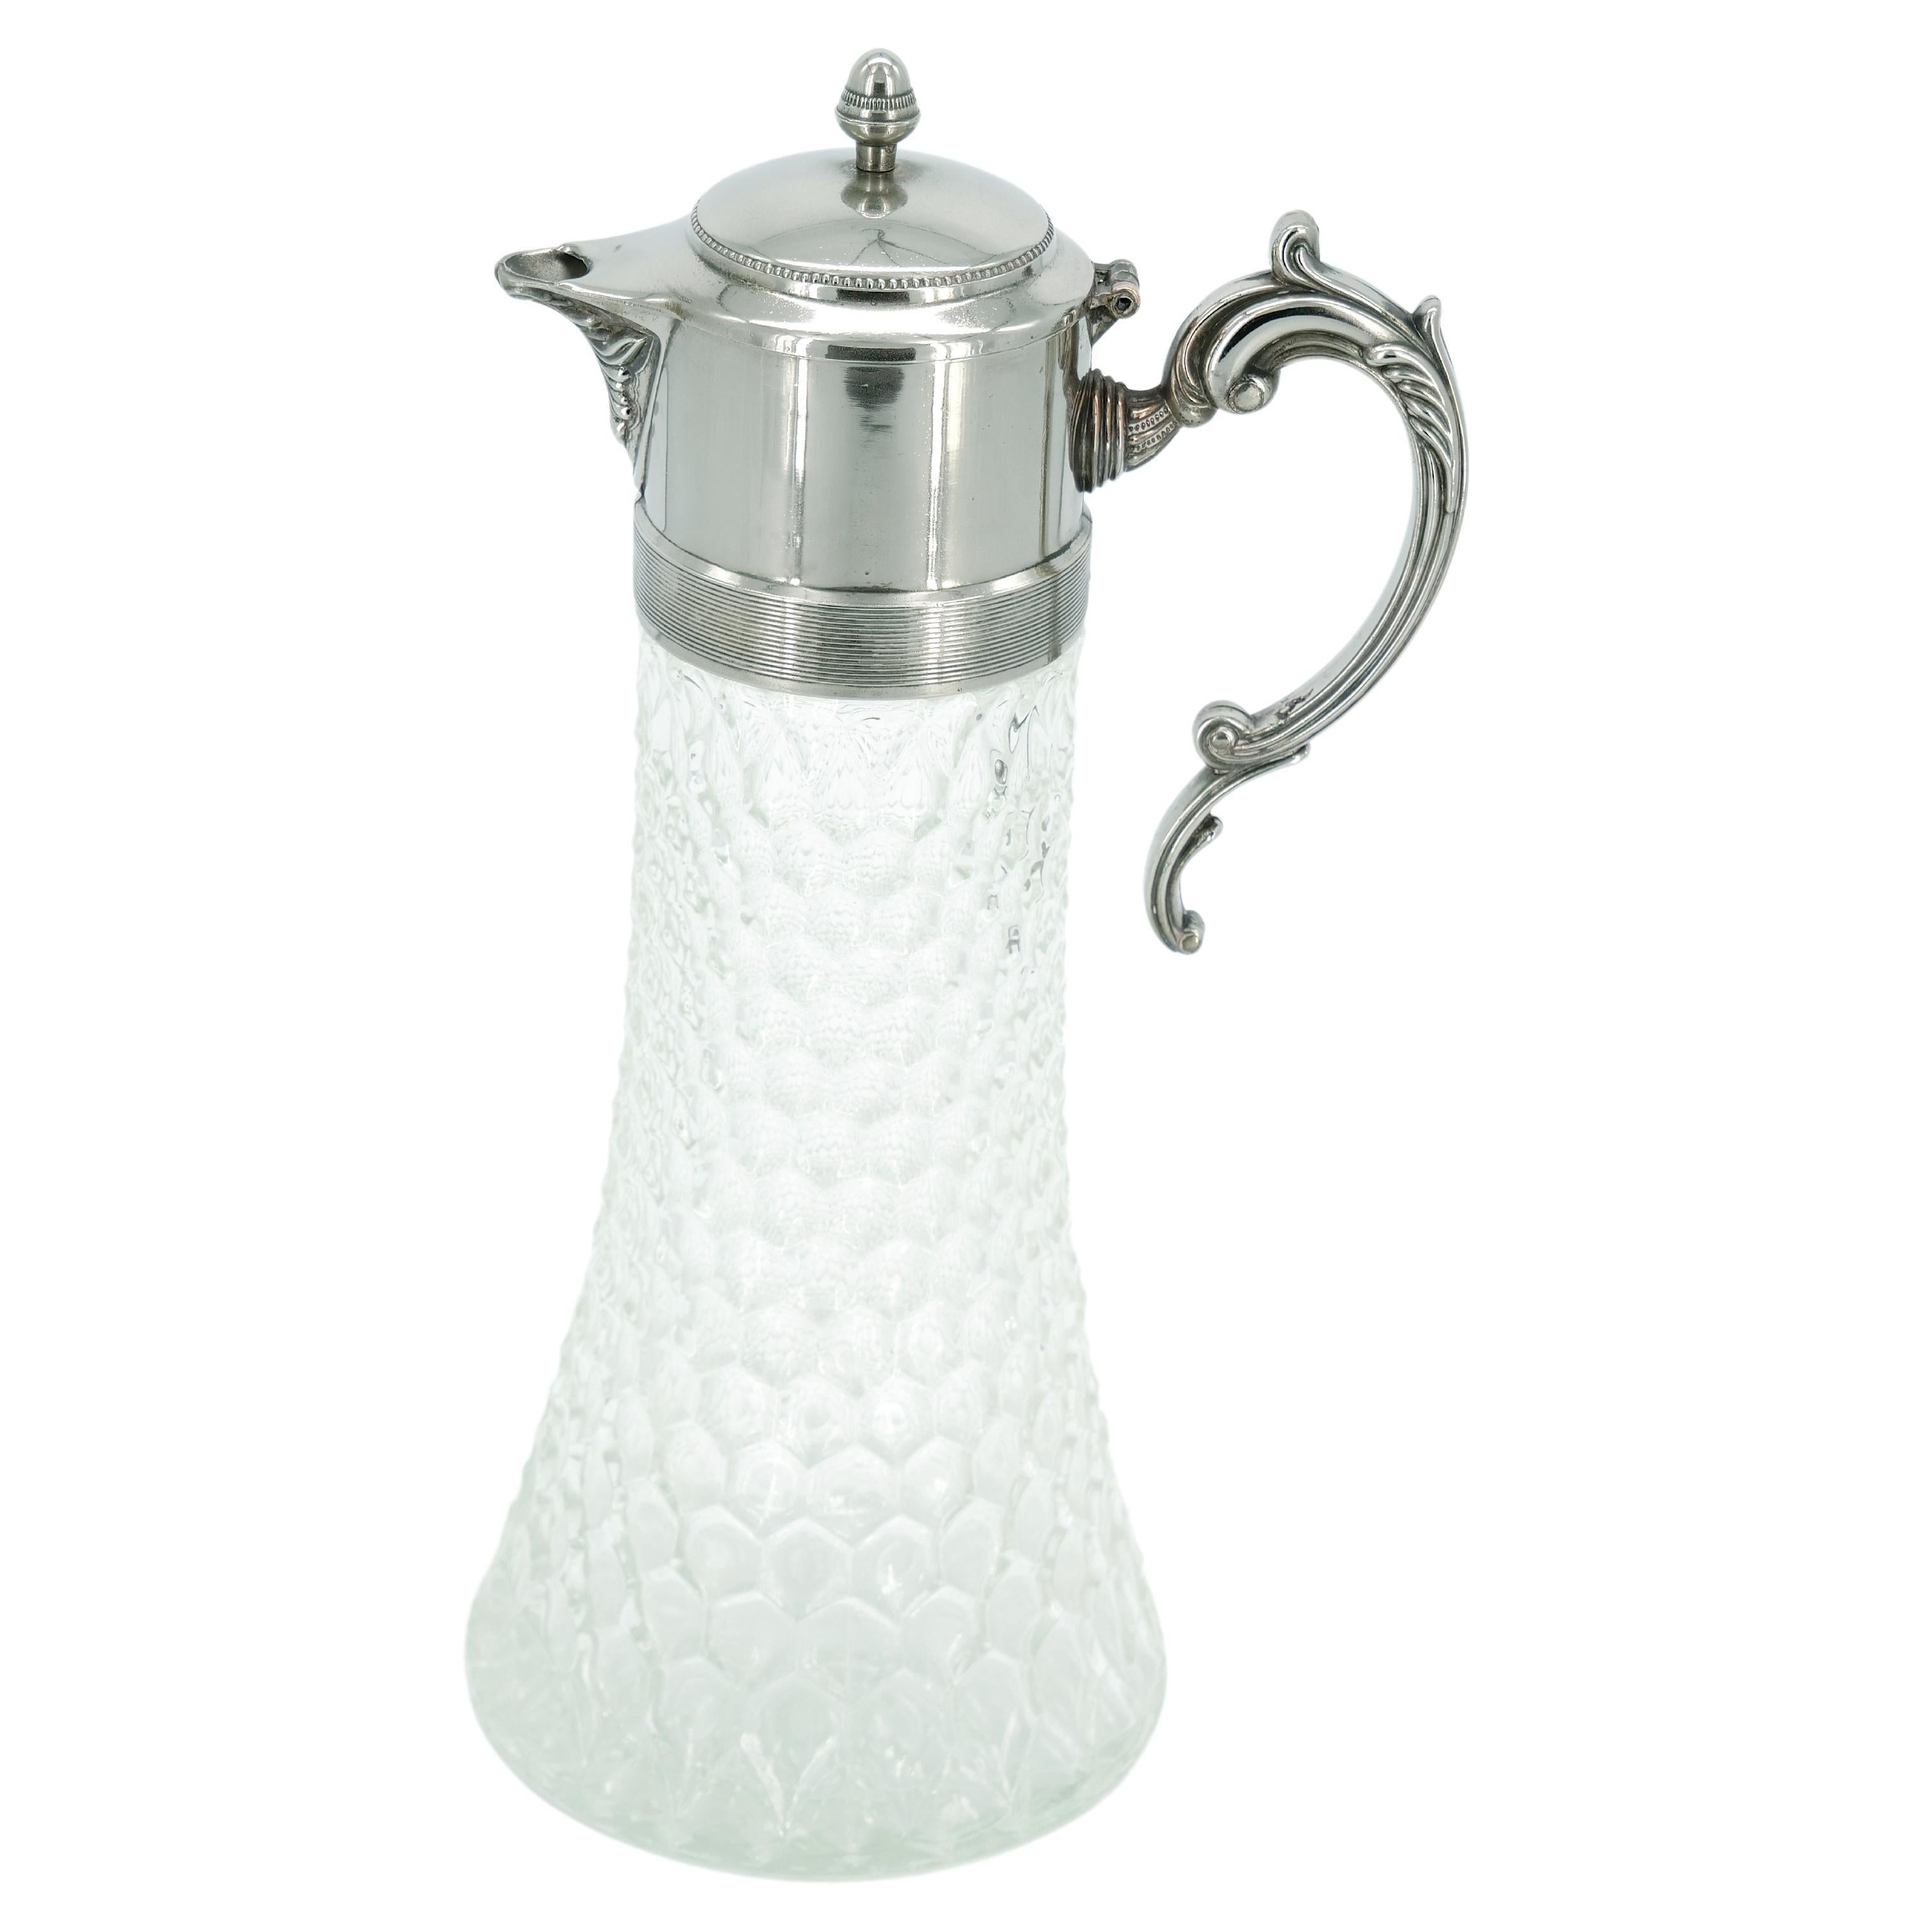 Introduce a touch of 19th-century elegance to your table or bar with this exquisite English Silver Plate and Cut Glass Claret Jug from the mid-19th century. The pitcher, designed in the Edwardian style, boasts a diamond-cut glass body, creating a